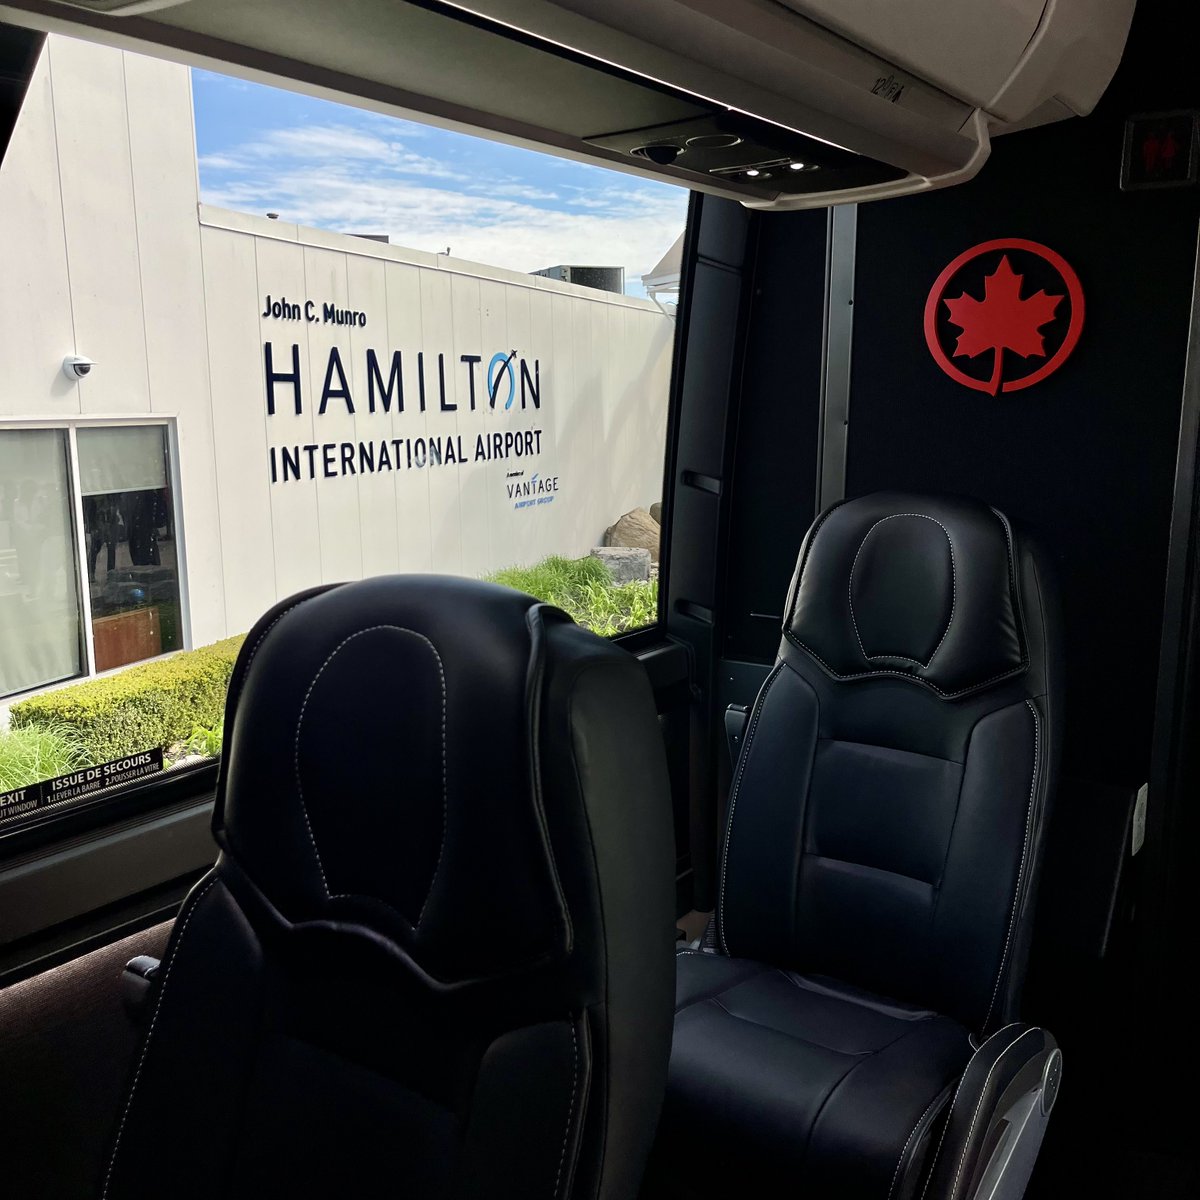 The wheels are officially in motion on a new and convenient way to travel as we celebrate the launch of @AirCanada and @ridelandline's luxury motorcoach service between @flyyhm and @TorontoPearson, connecting passengers with over 140+ destinations worldwide. 🚍✈️🌎 #HamOnt